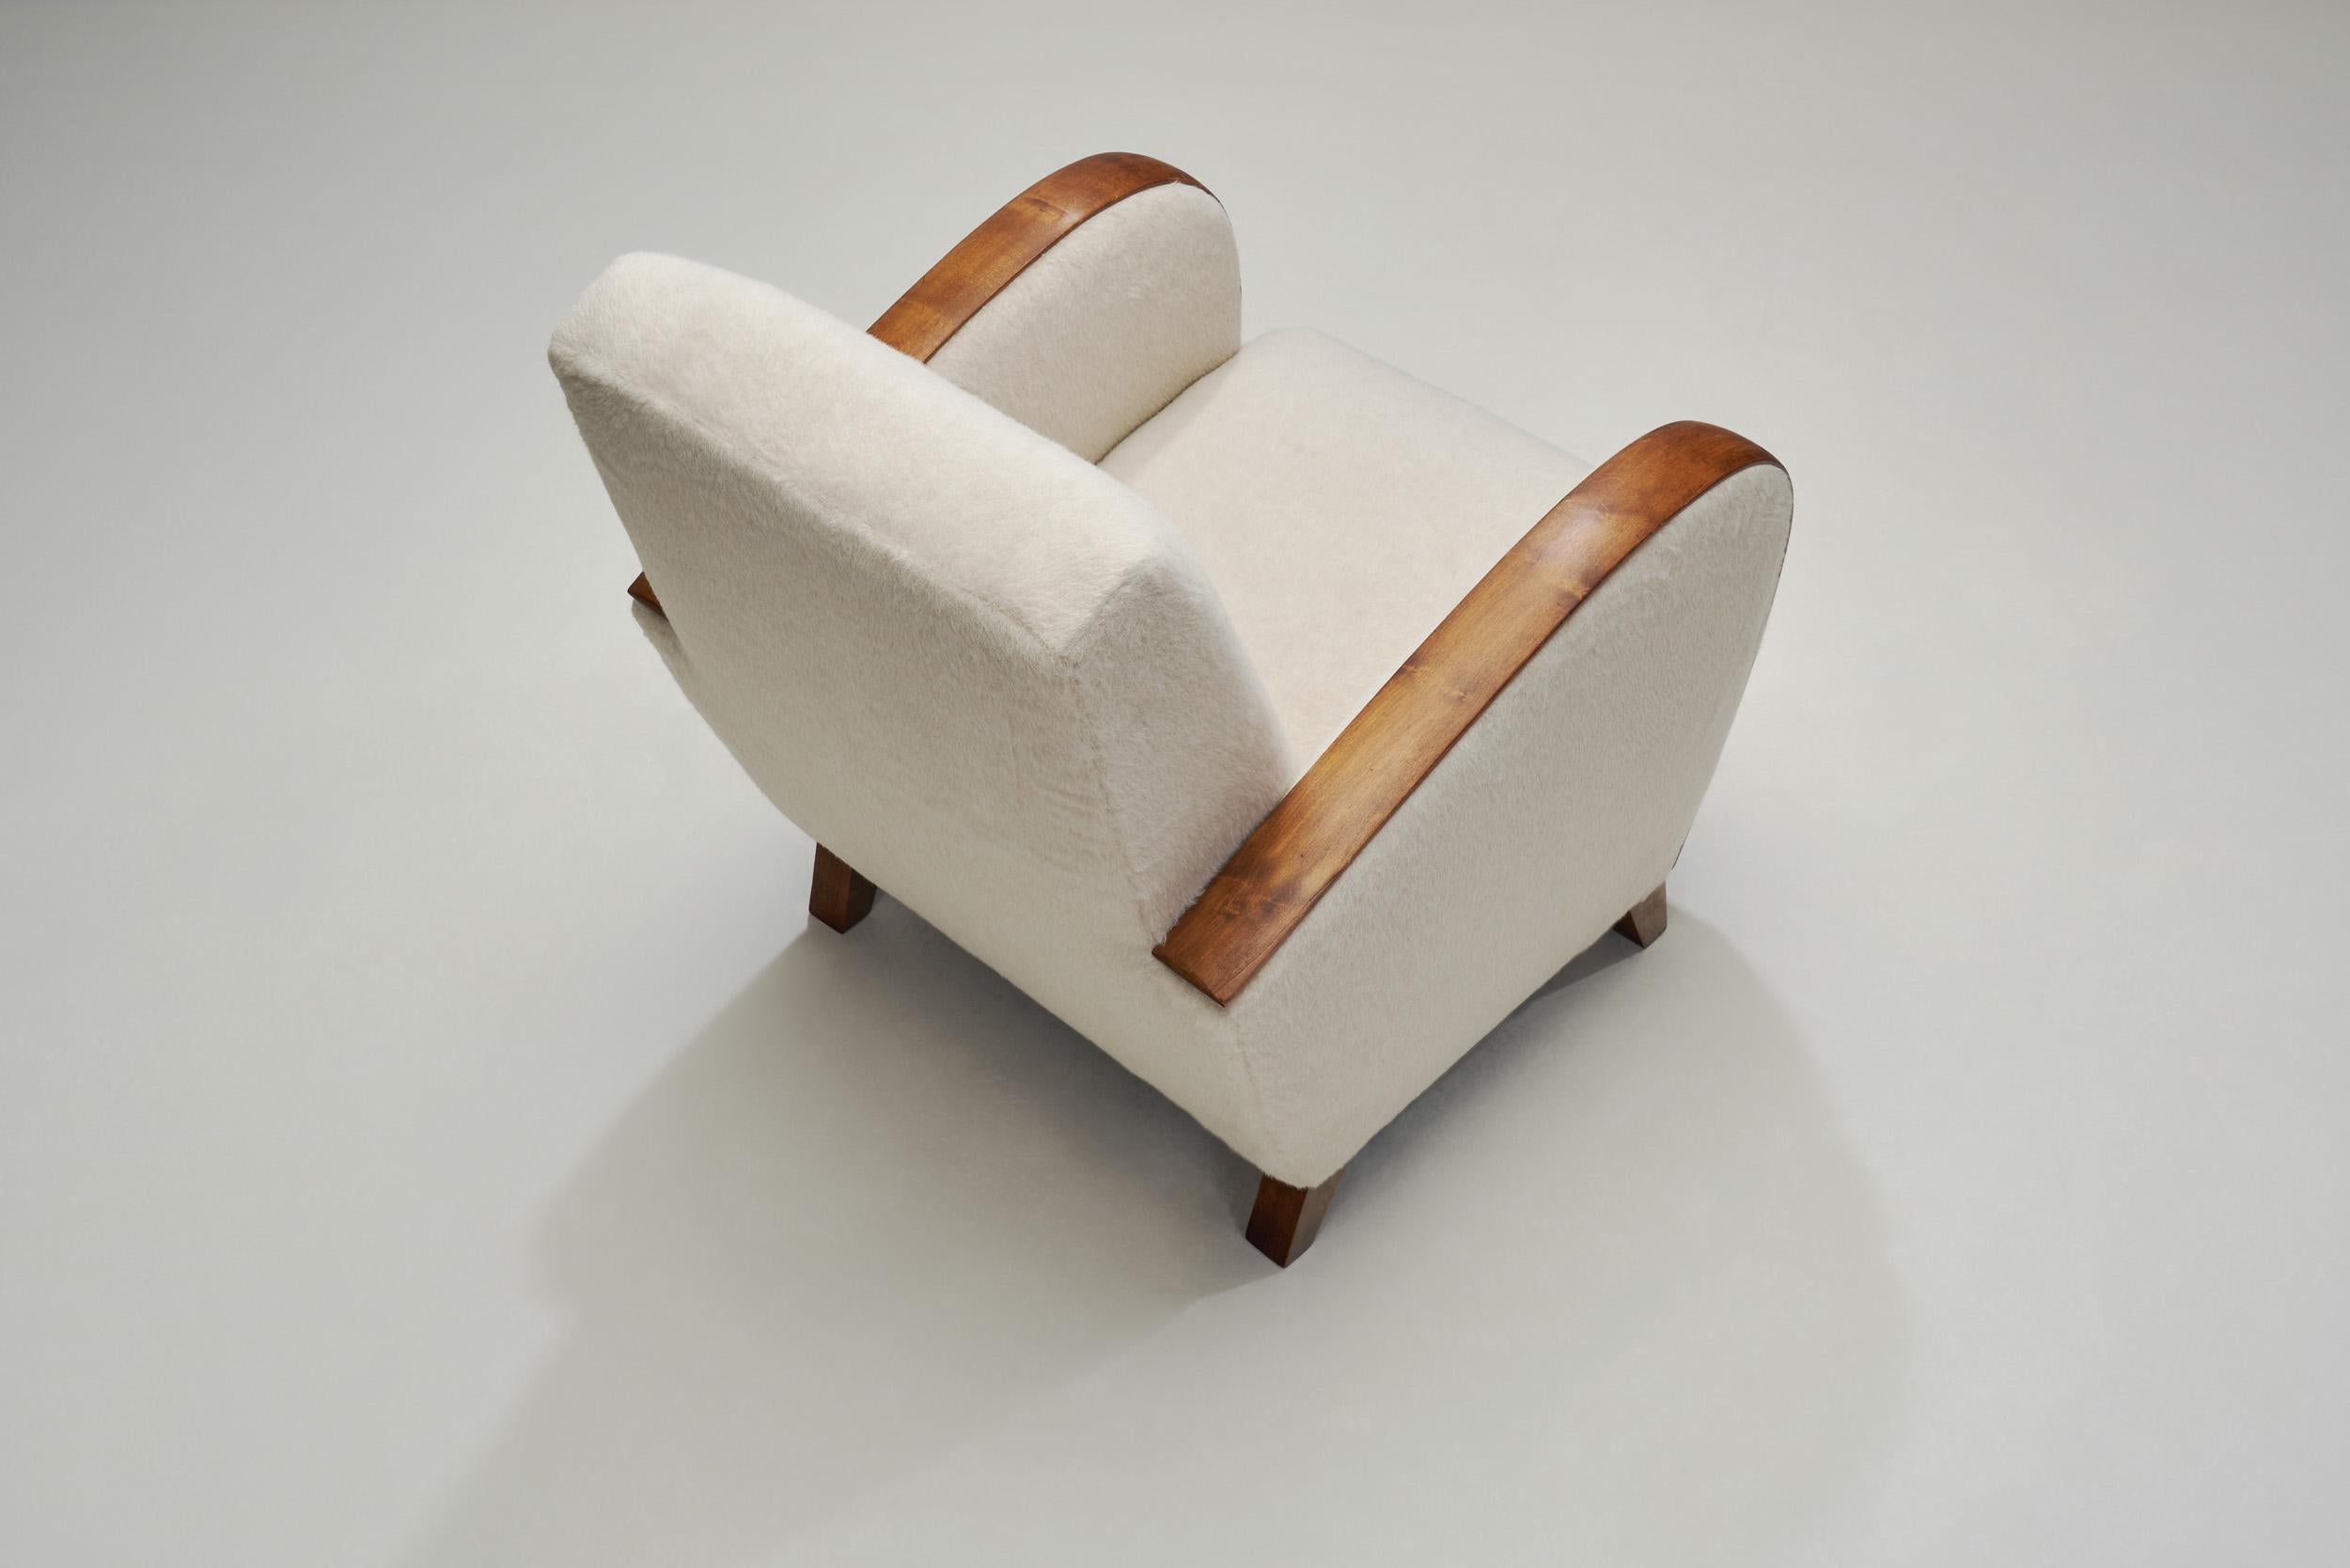 Mid-20th Century A Pair of Reupholstered Funkis Armchairs by Axel Einar Hjorth, Sweden 1930s.